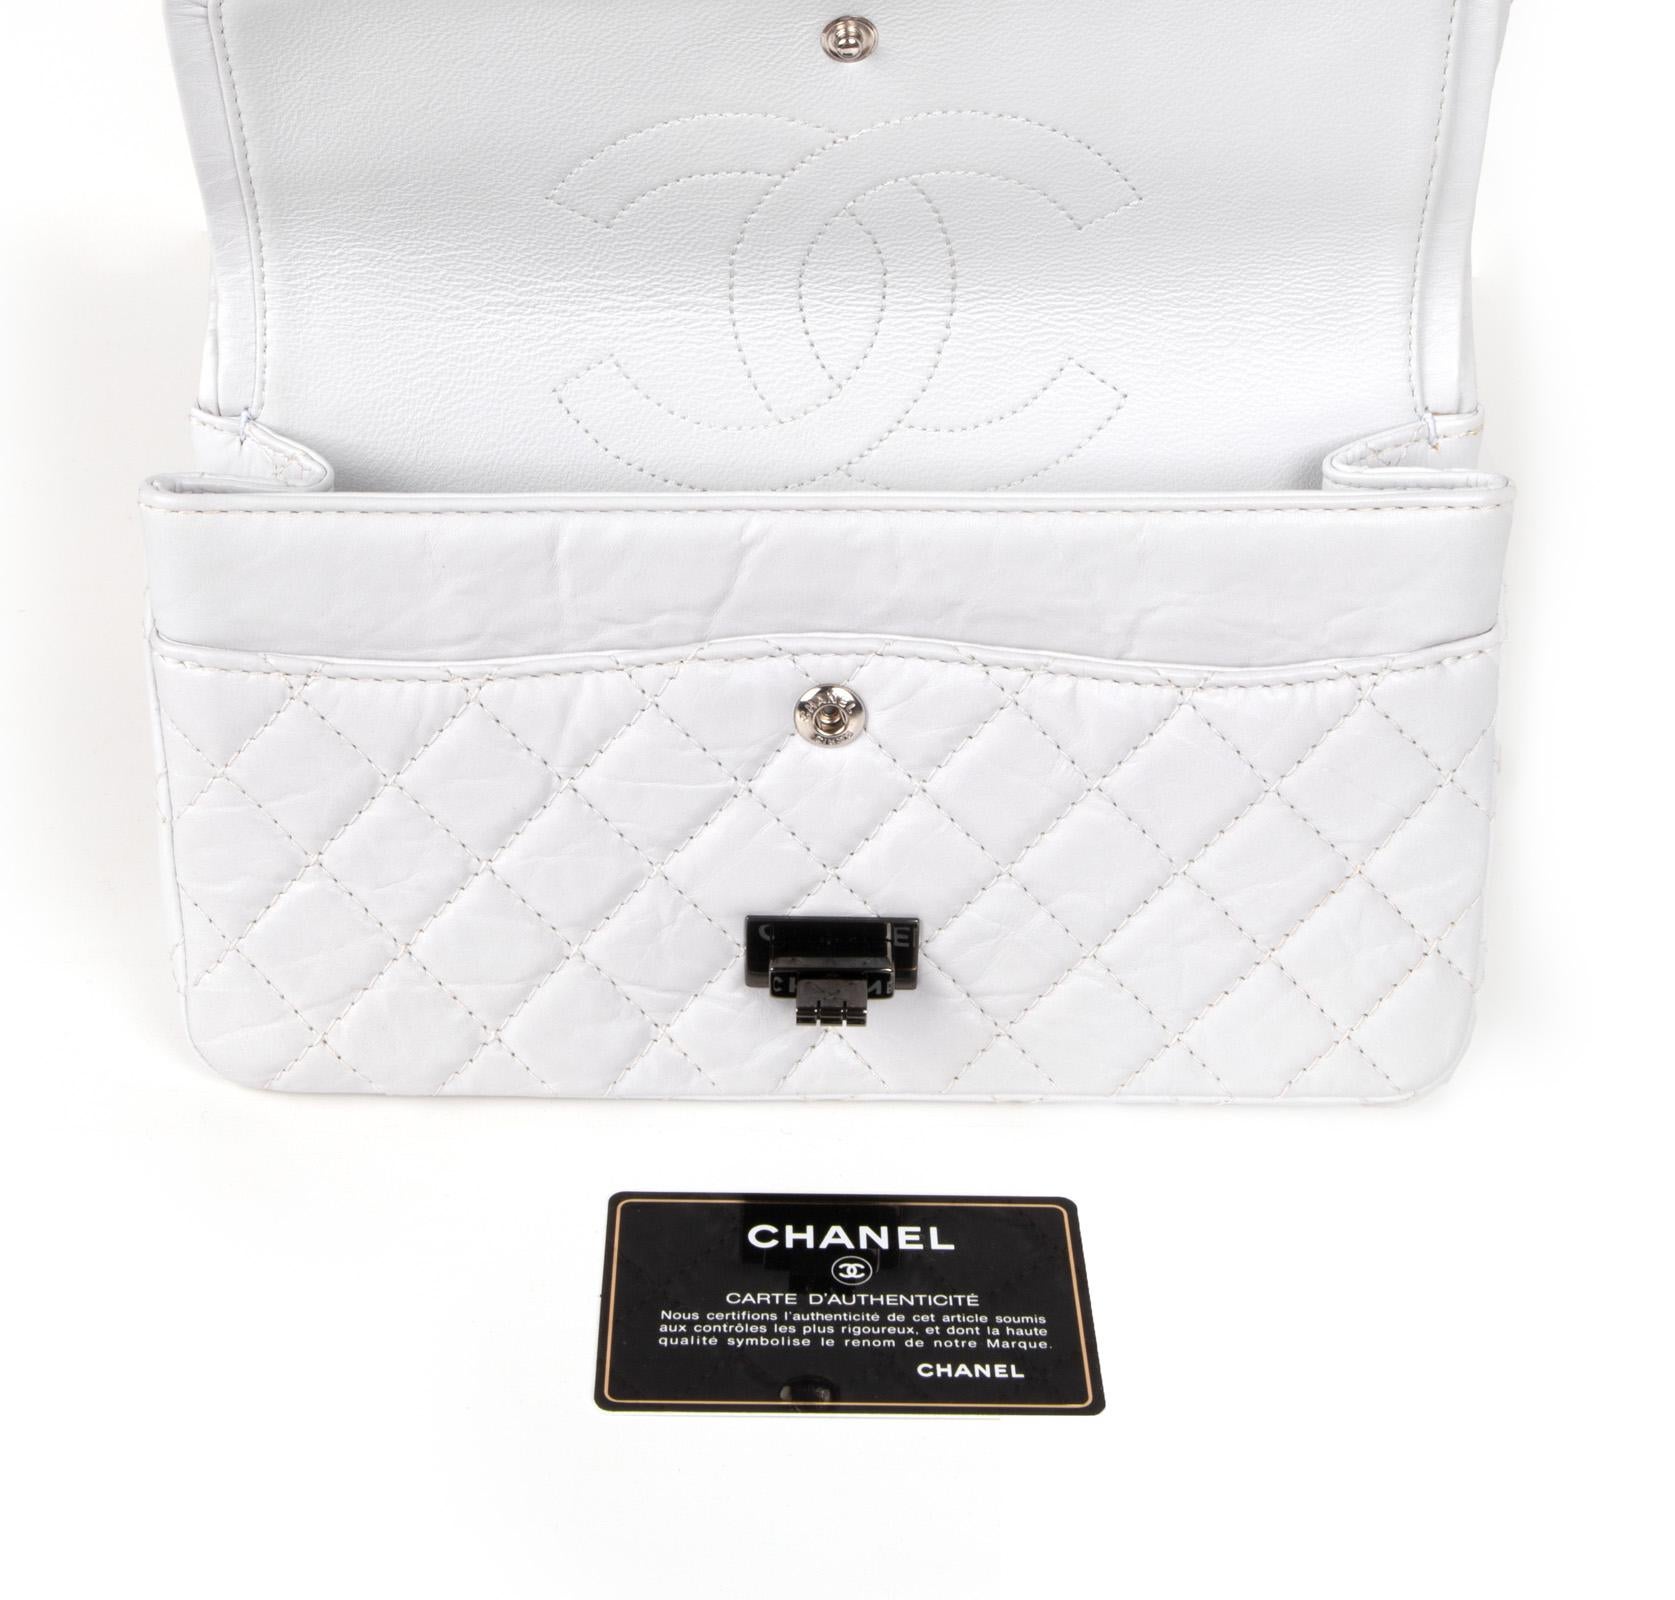 Chanel Bag 2.25 Small Chalk White Distressed Leather Double Flap 1